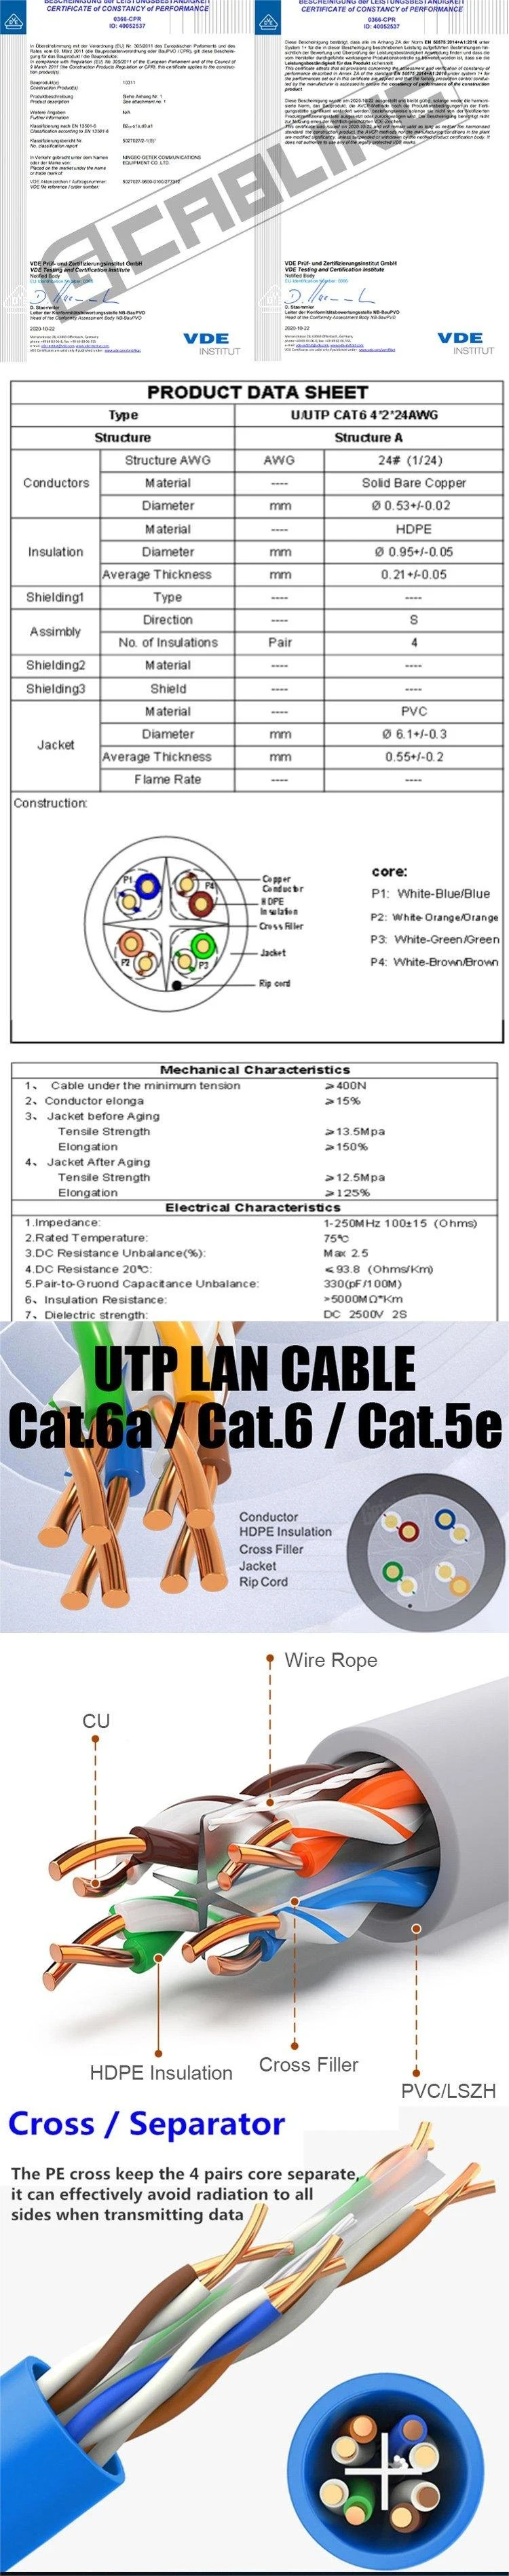 Gcabling UTP LAN Cat5e CAT6 CAT6A Computer Communication Cable Twisted 4pair Copper Solid Wire Indoor Data Cat 6 Network Ethernet Cable